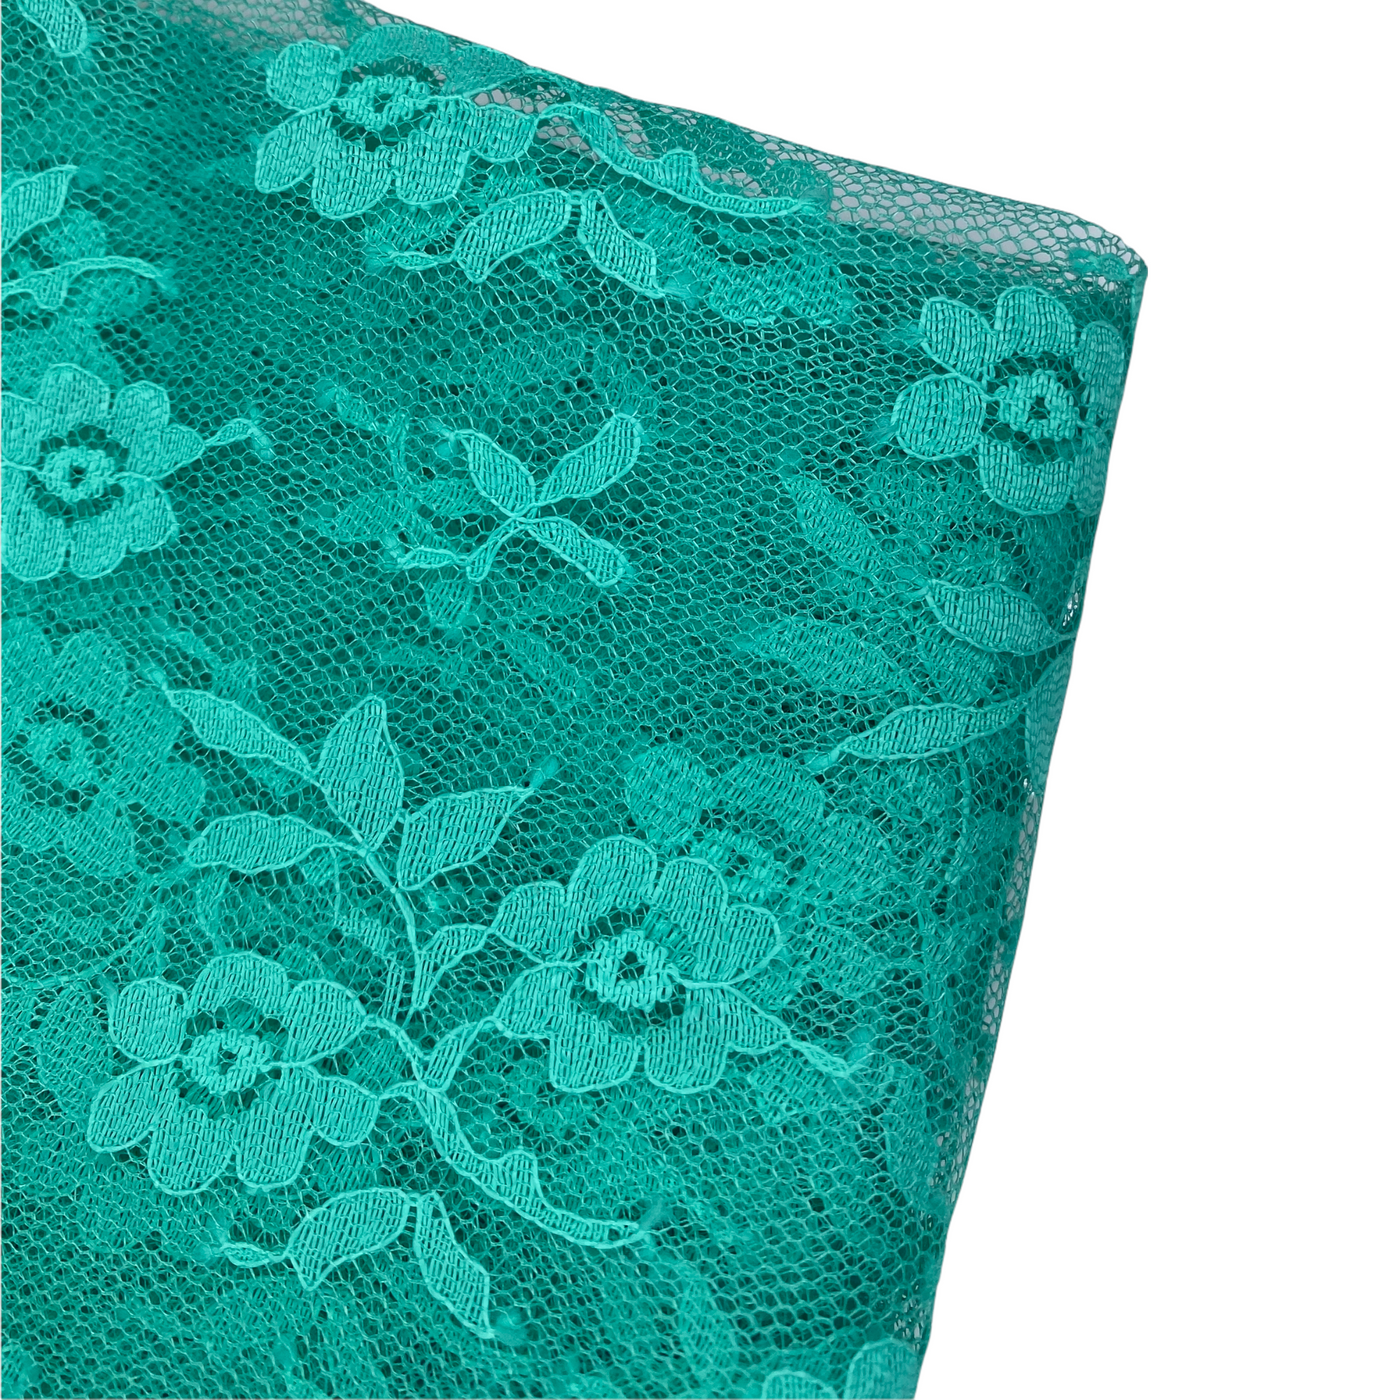 Scalloped Edged Floral Polyester Lace - 52” - Green